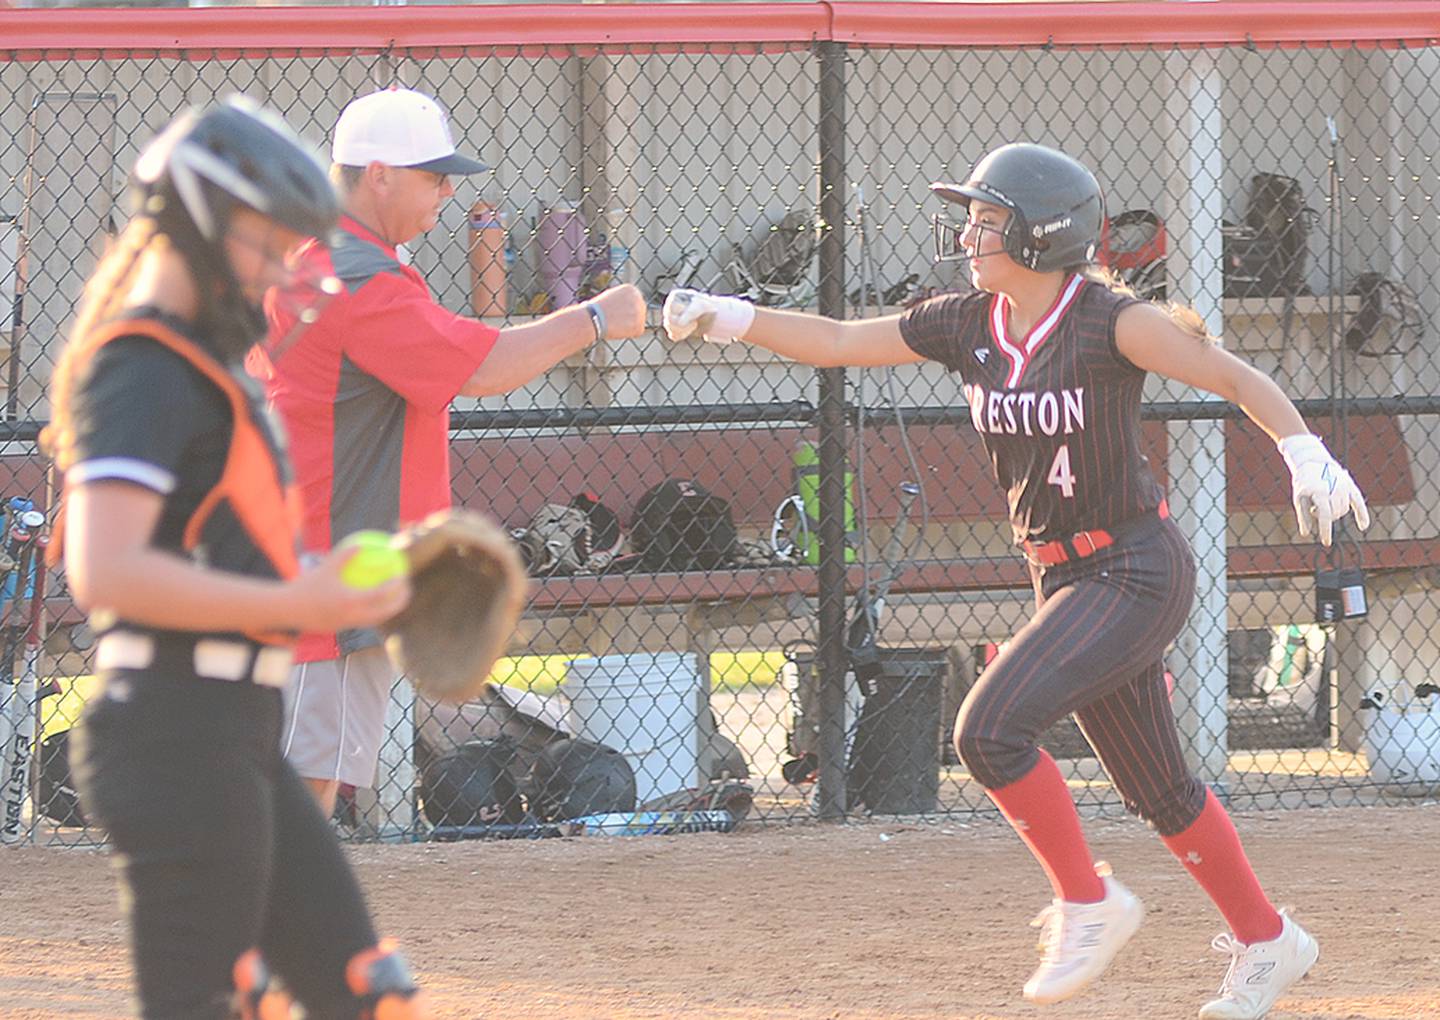 Creston coach Dave Hartman gives Jersey Foote (4) a fist bump after Foote's two-run home run in the seventh inning Monday. Foote had three RBIs in the 12-4 loss.